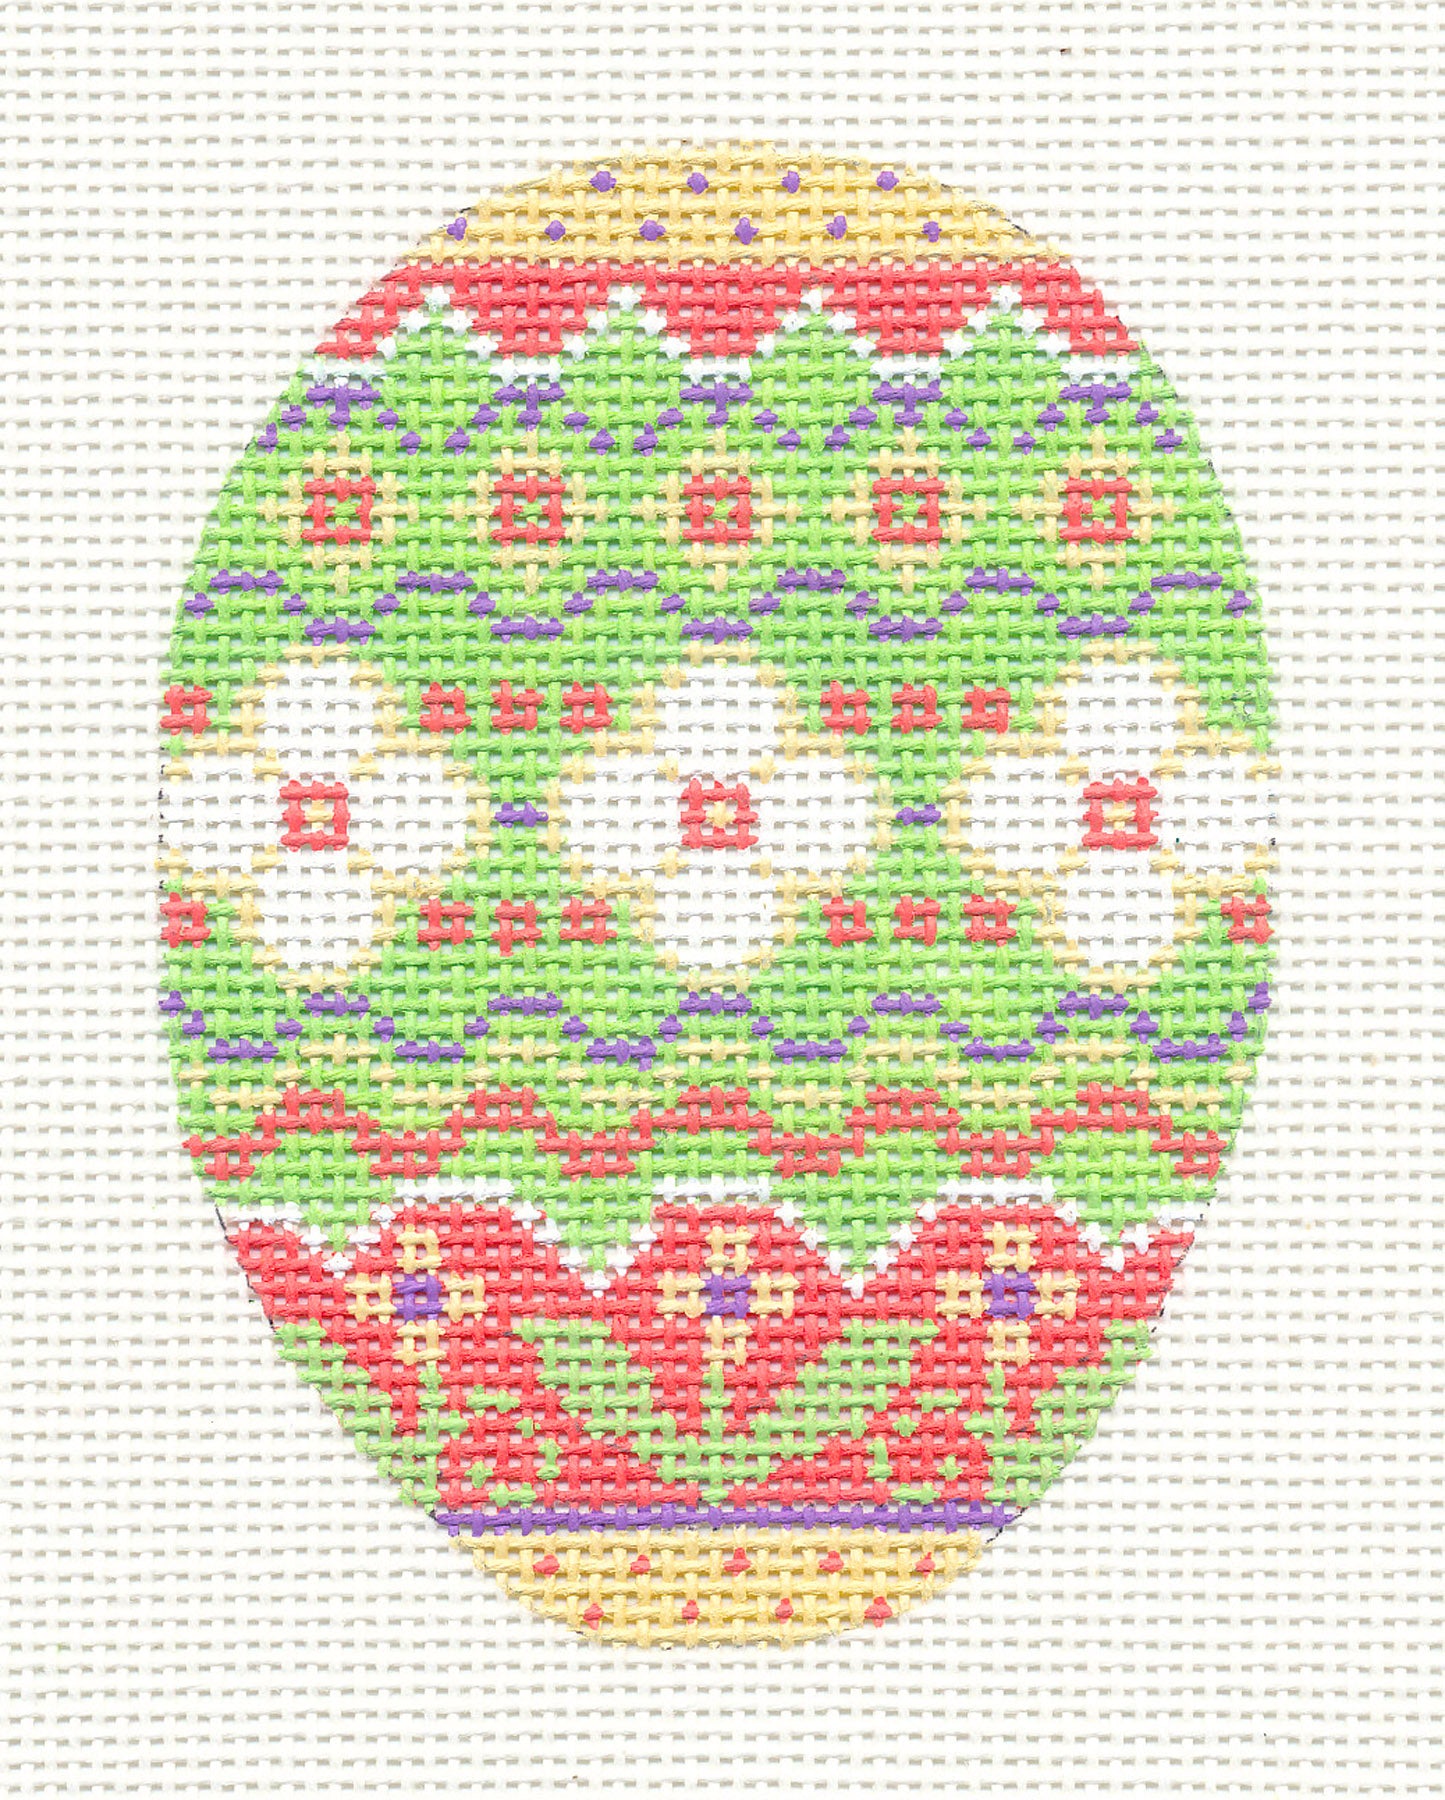 Easter Egg Floral Multi-Colored Ornament on Handpainted Needlepoint Canvas ~ by Danji Designs